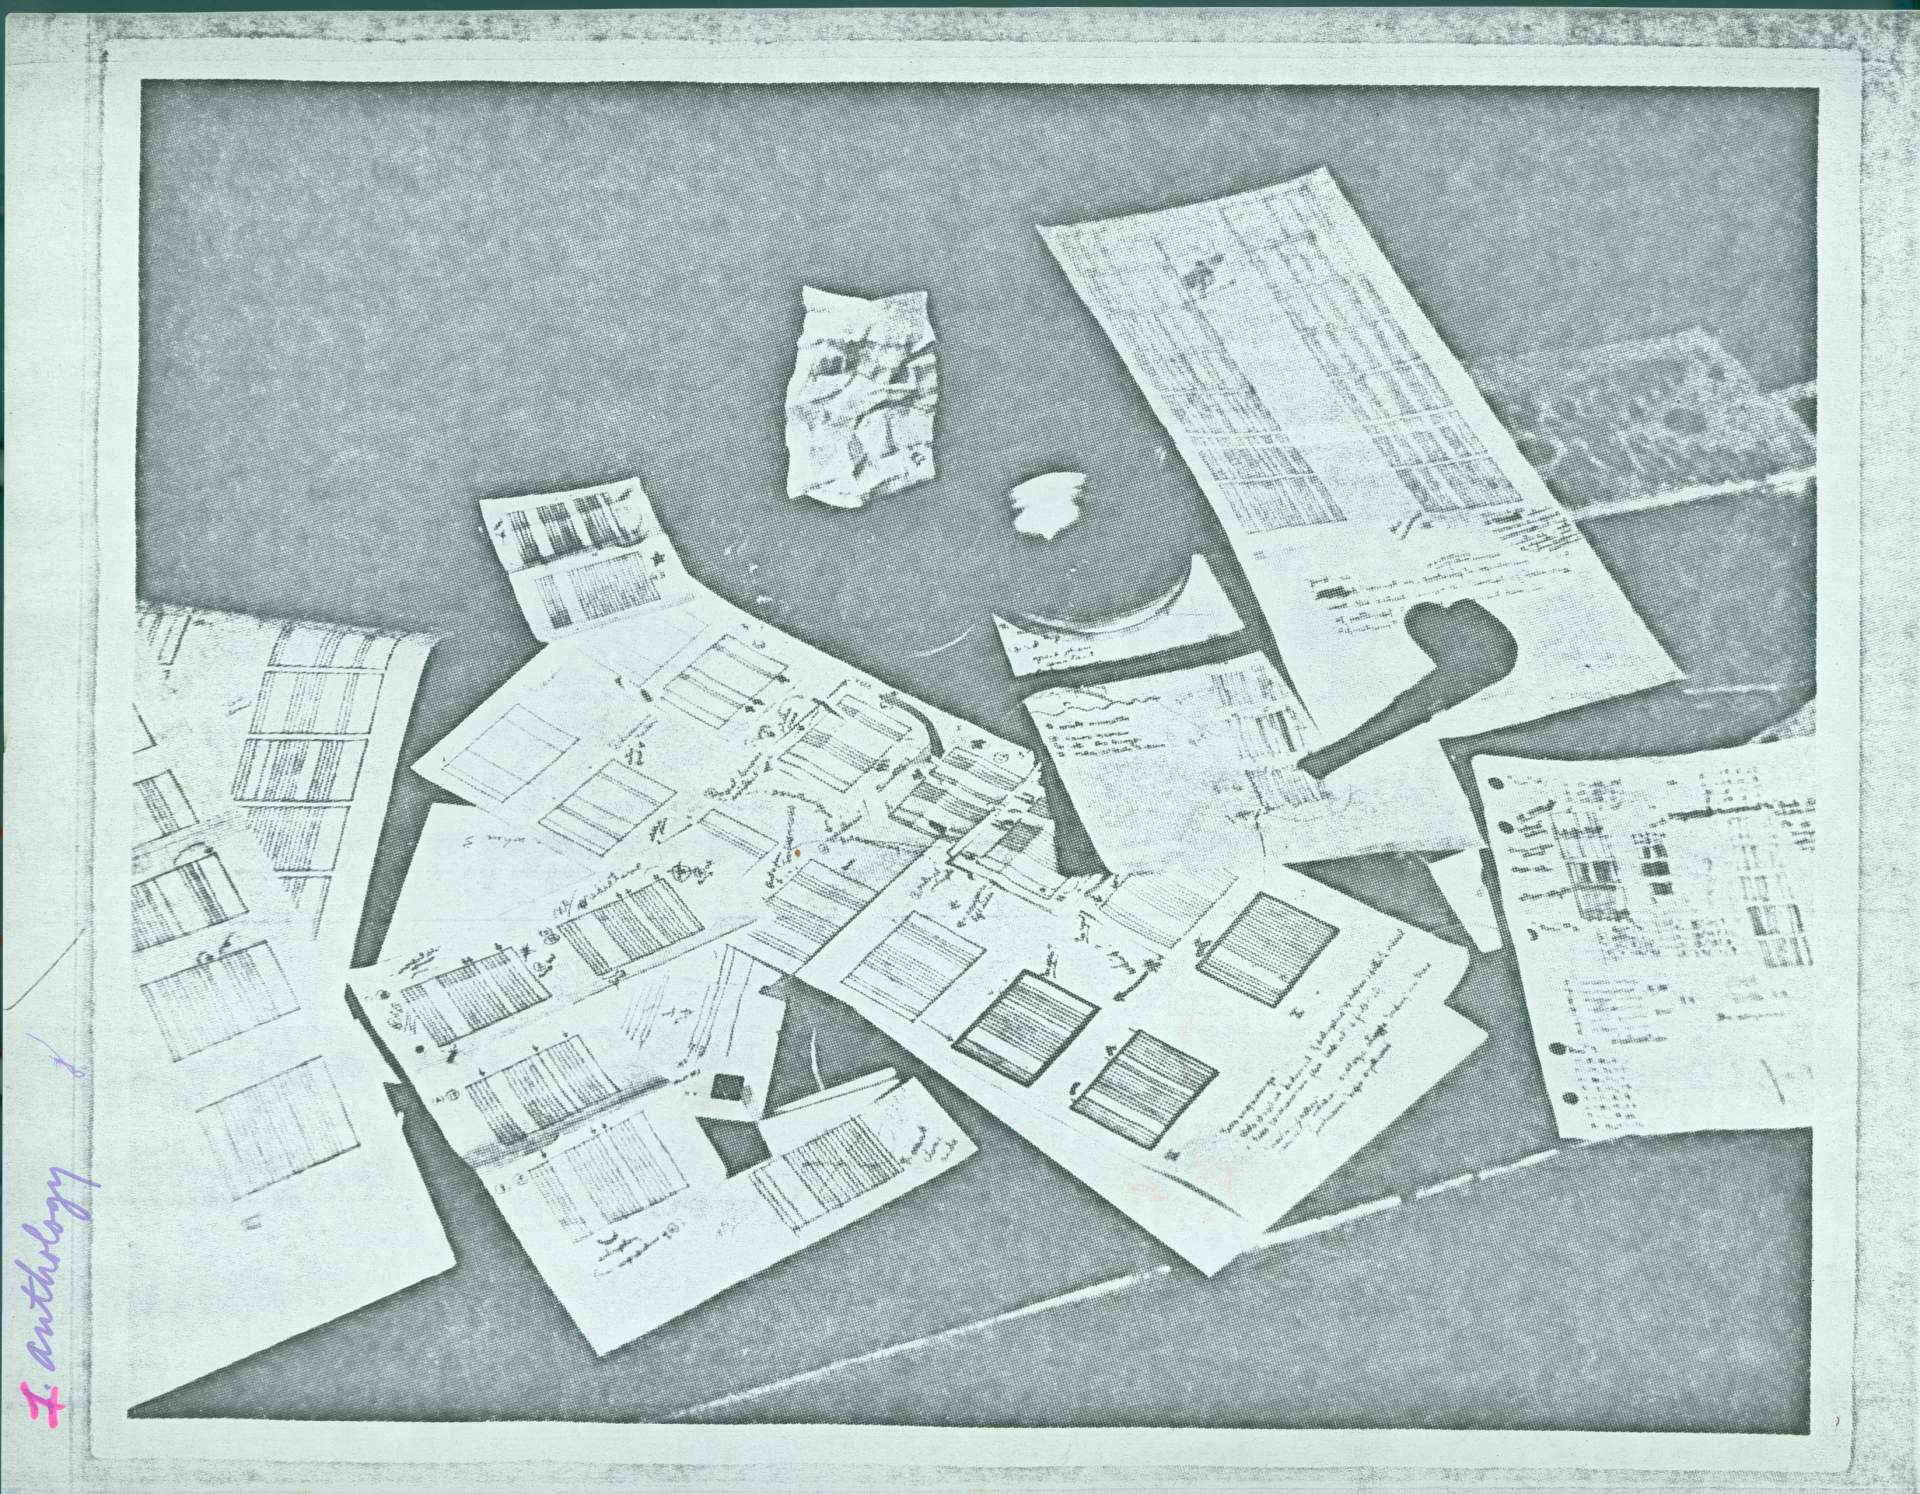 Untitled (photo of notes and charts)